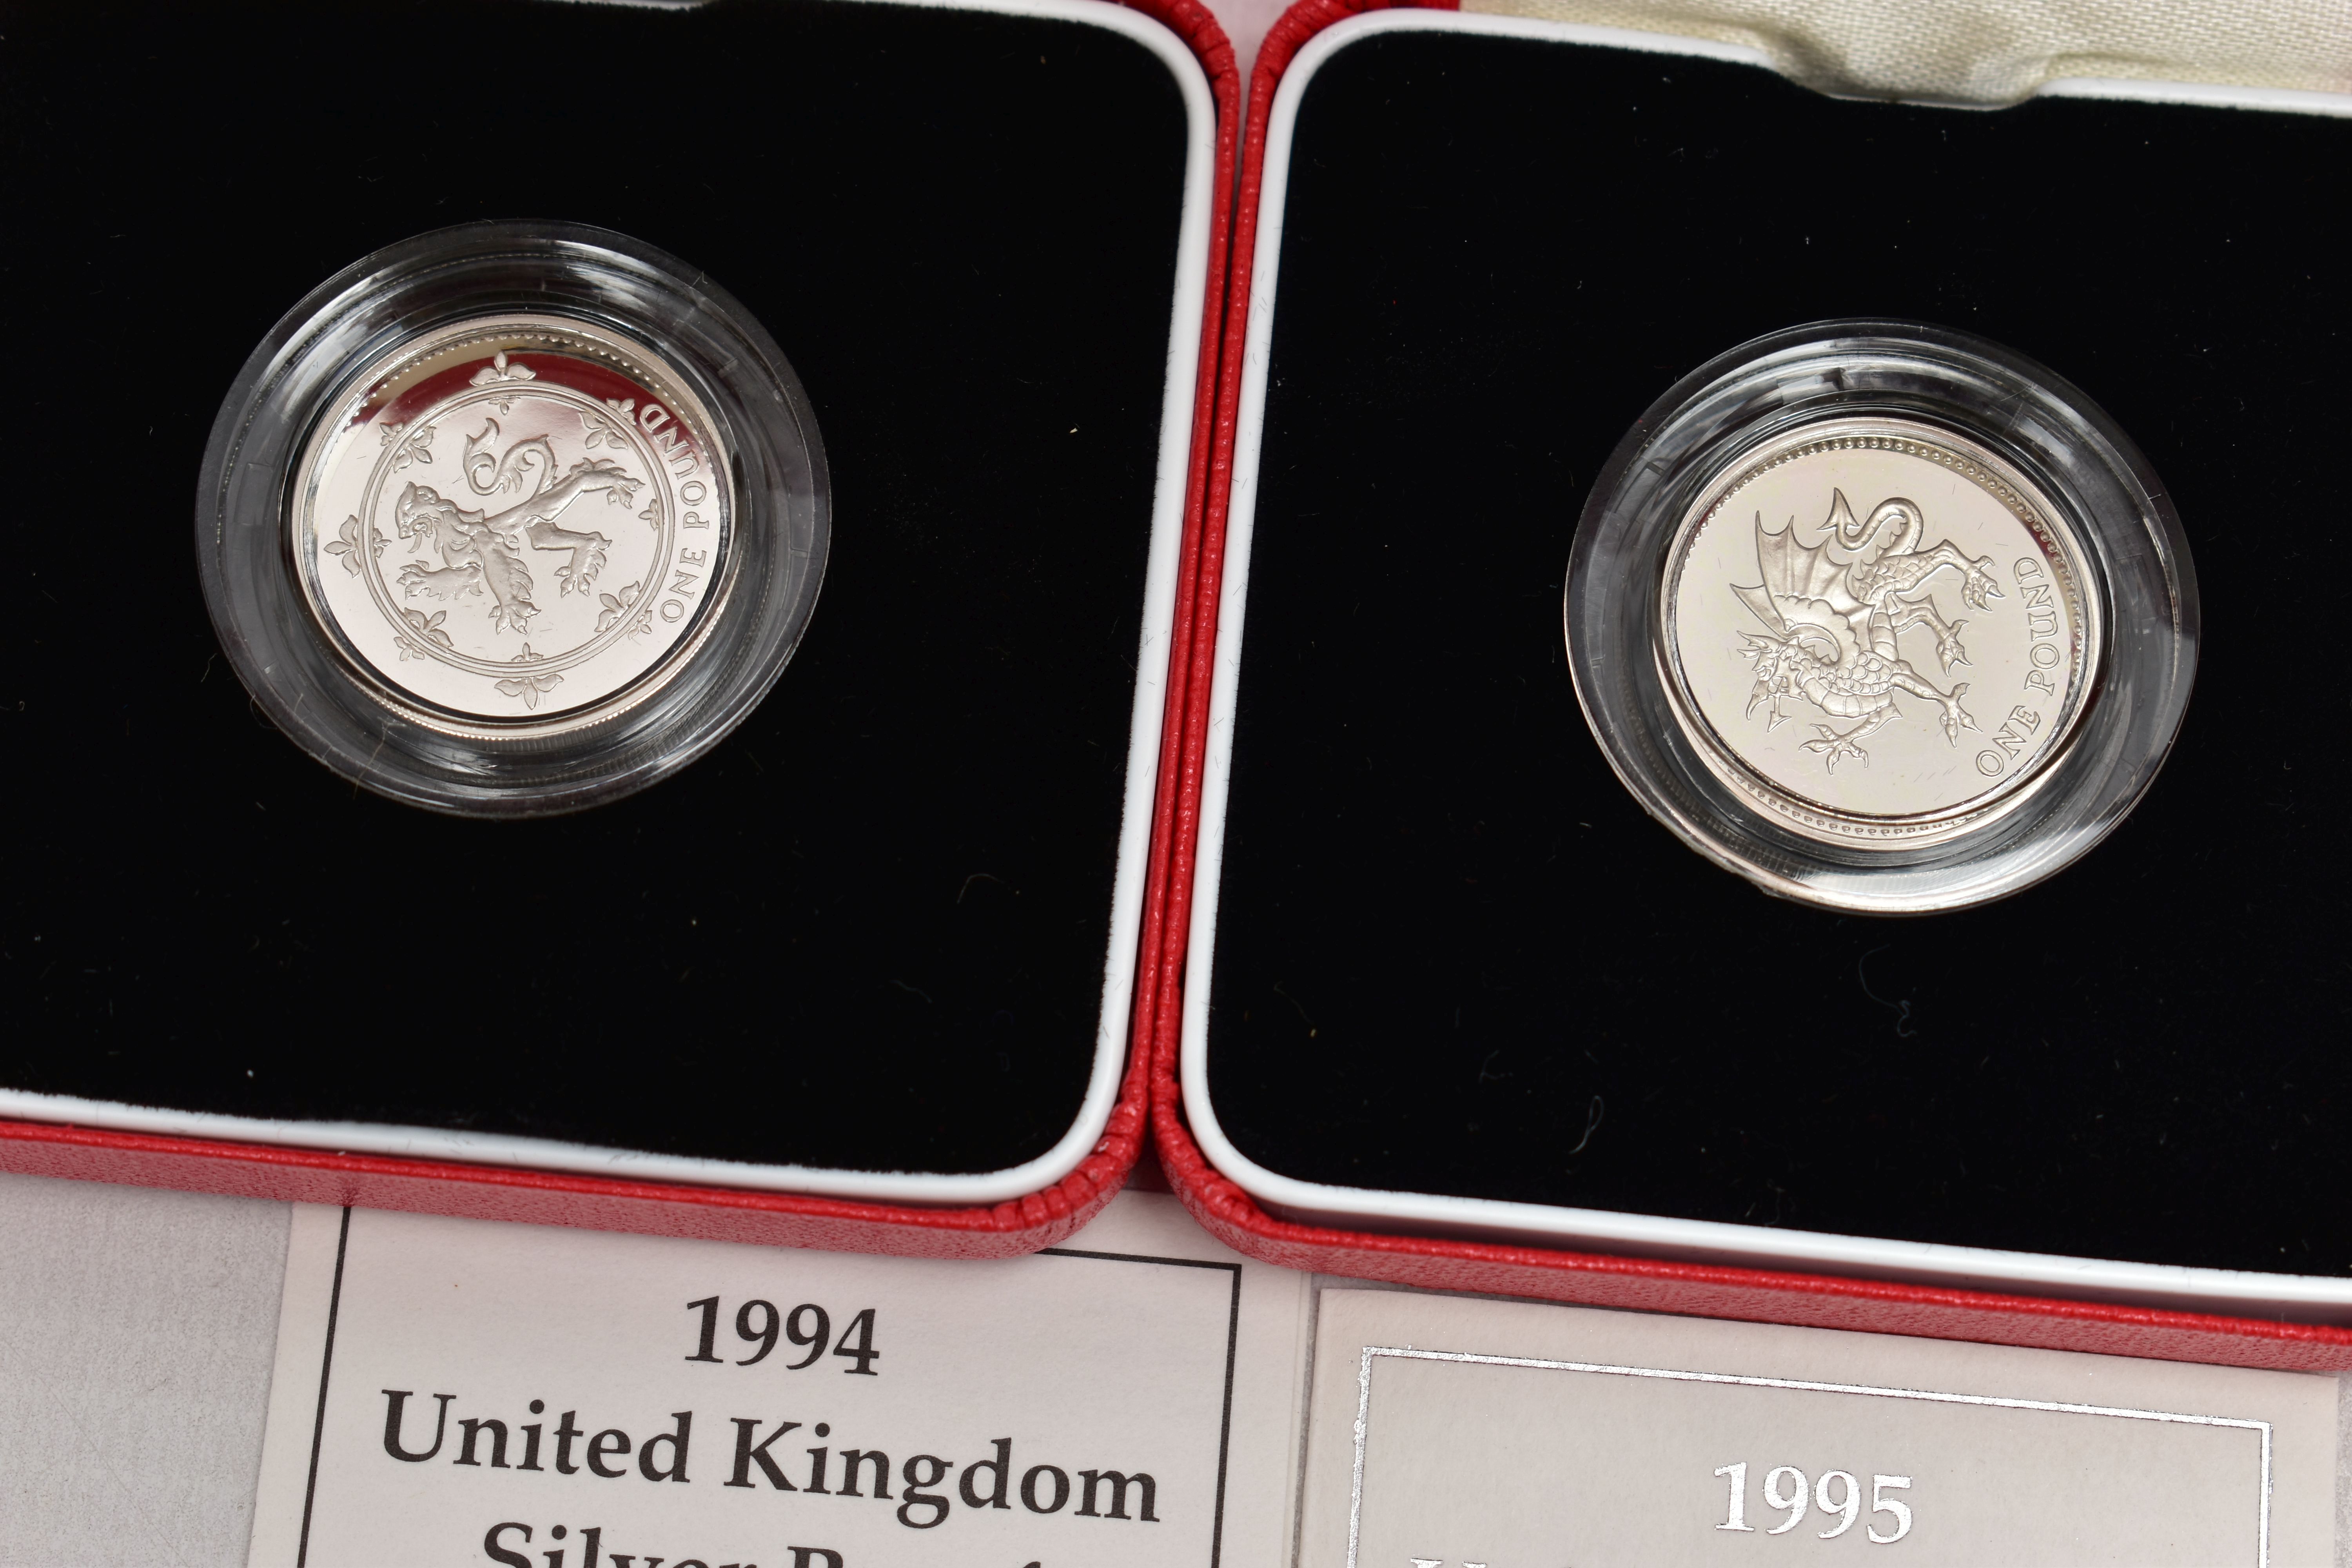 SILVER PIEDFORT PROOF ROYAL MINT ONE POUND COINS 1993, 1994, 1995, all with cetificates - Image 2 of 3